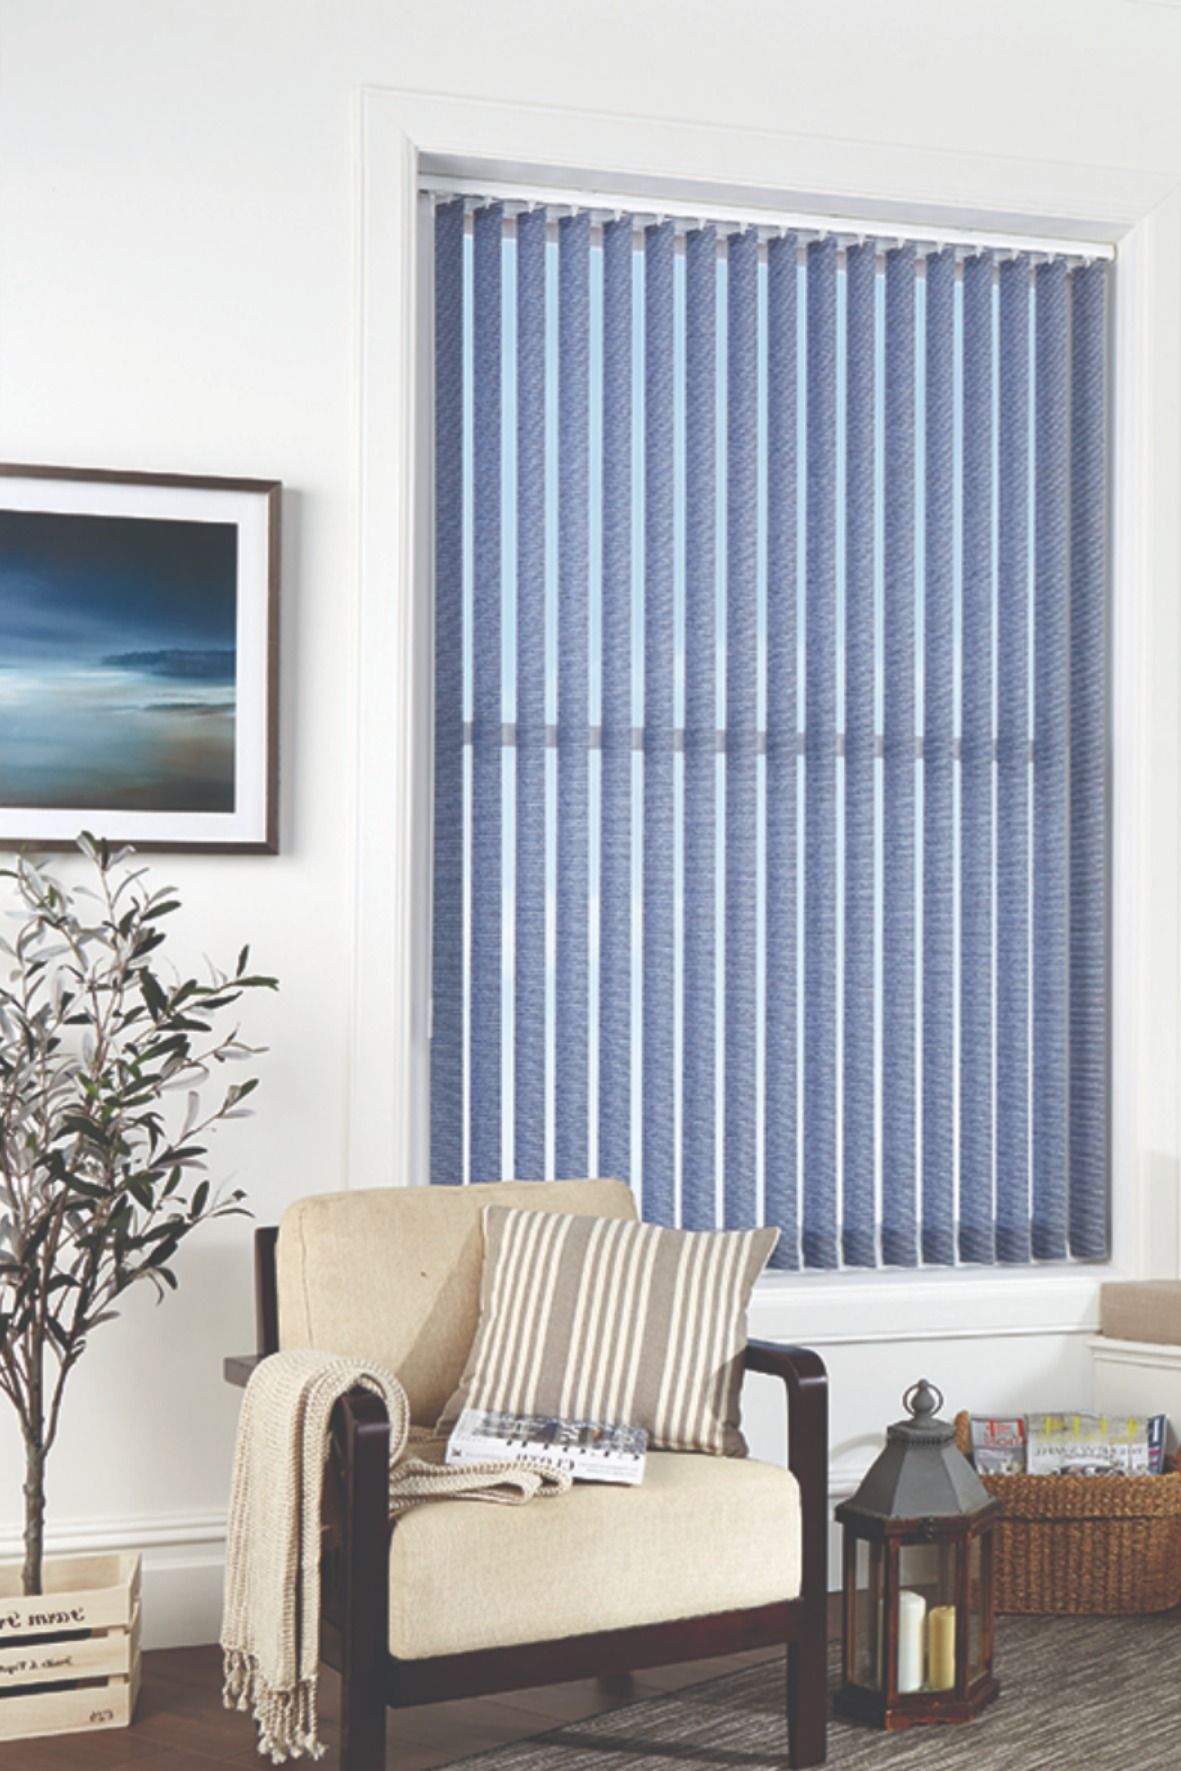 Curtains Vs Blinds: Pros Cons And Best Applications